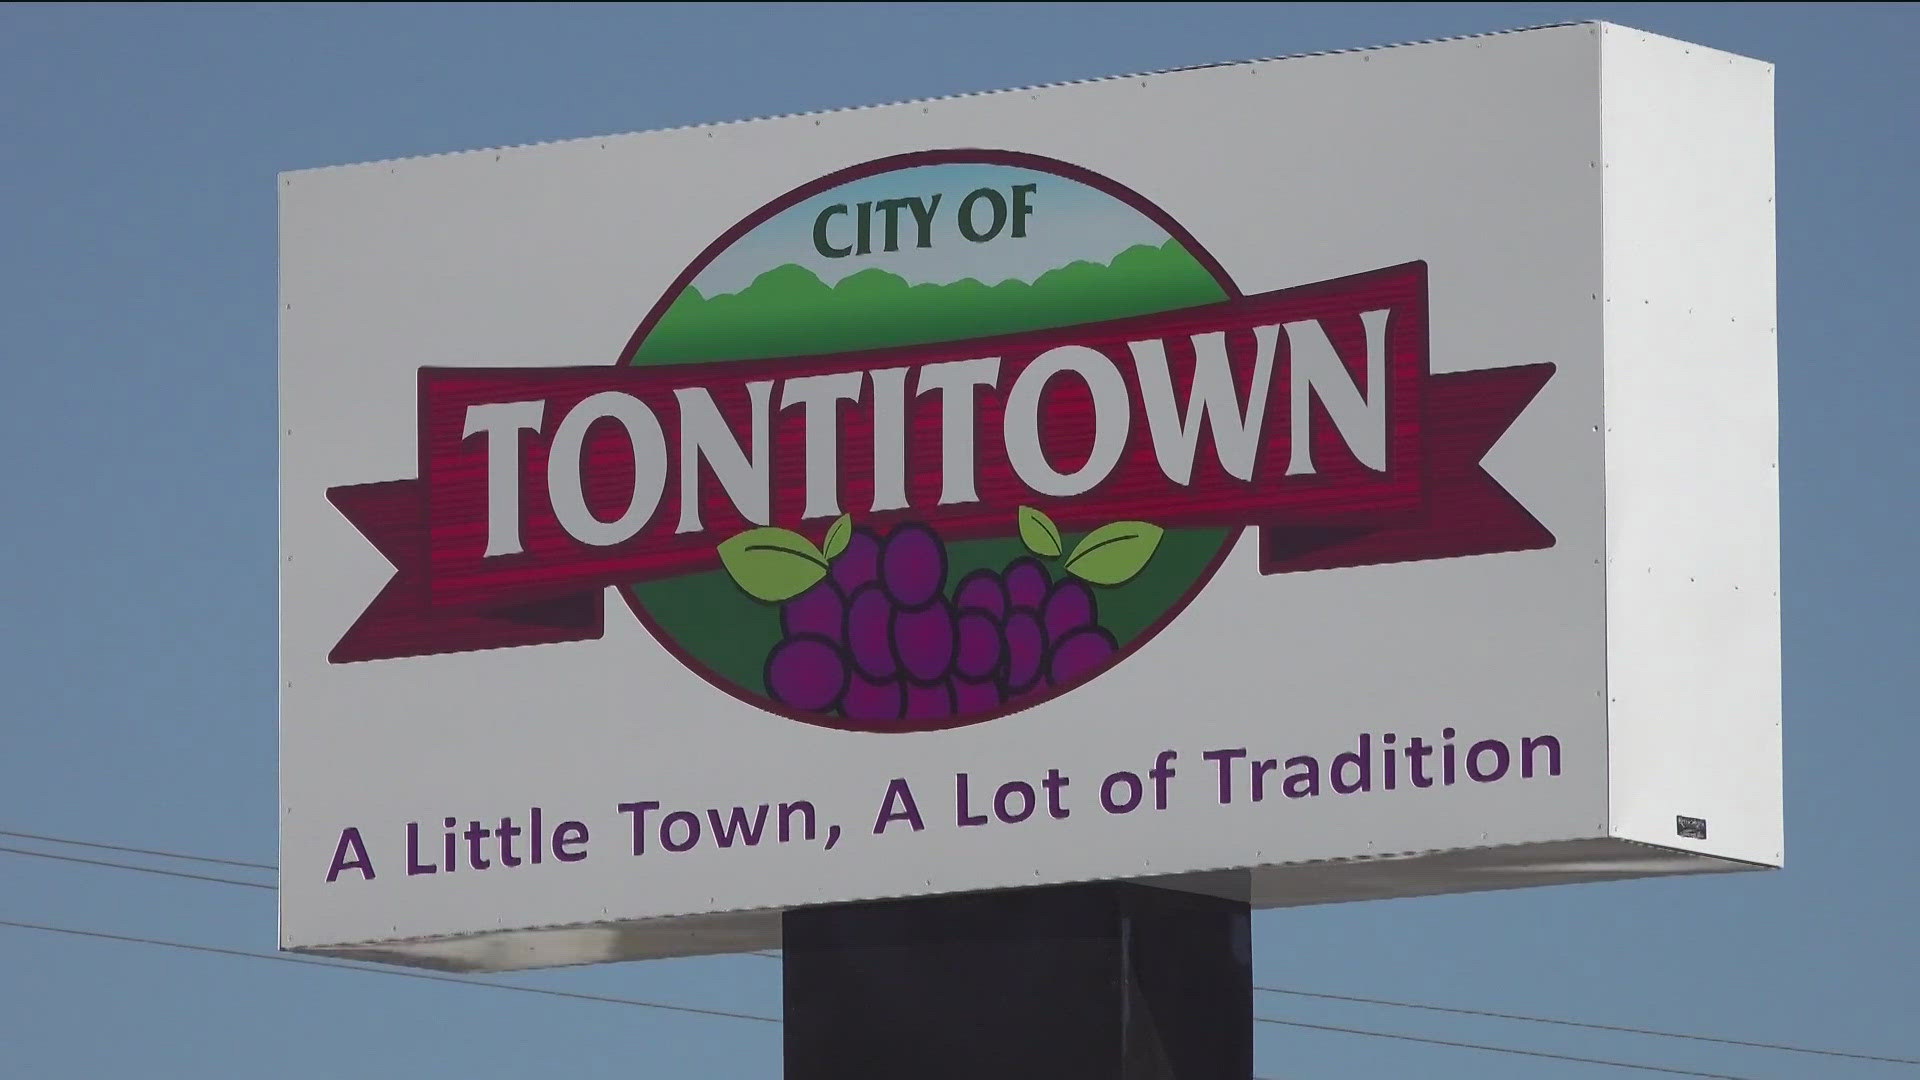 TONTITOWN AND MANY OTHER SMALLER CITIES IN NORTHWEST ARKANSAS HAVE BEEN EXPERIENCING A LOT OF GROWTH THESE PAST FEW YEARS...